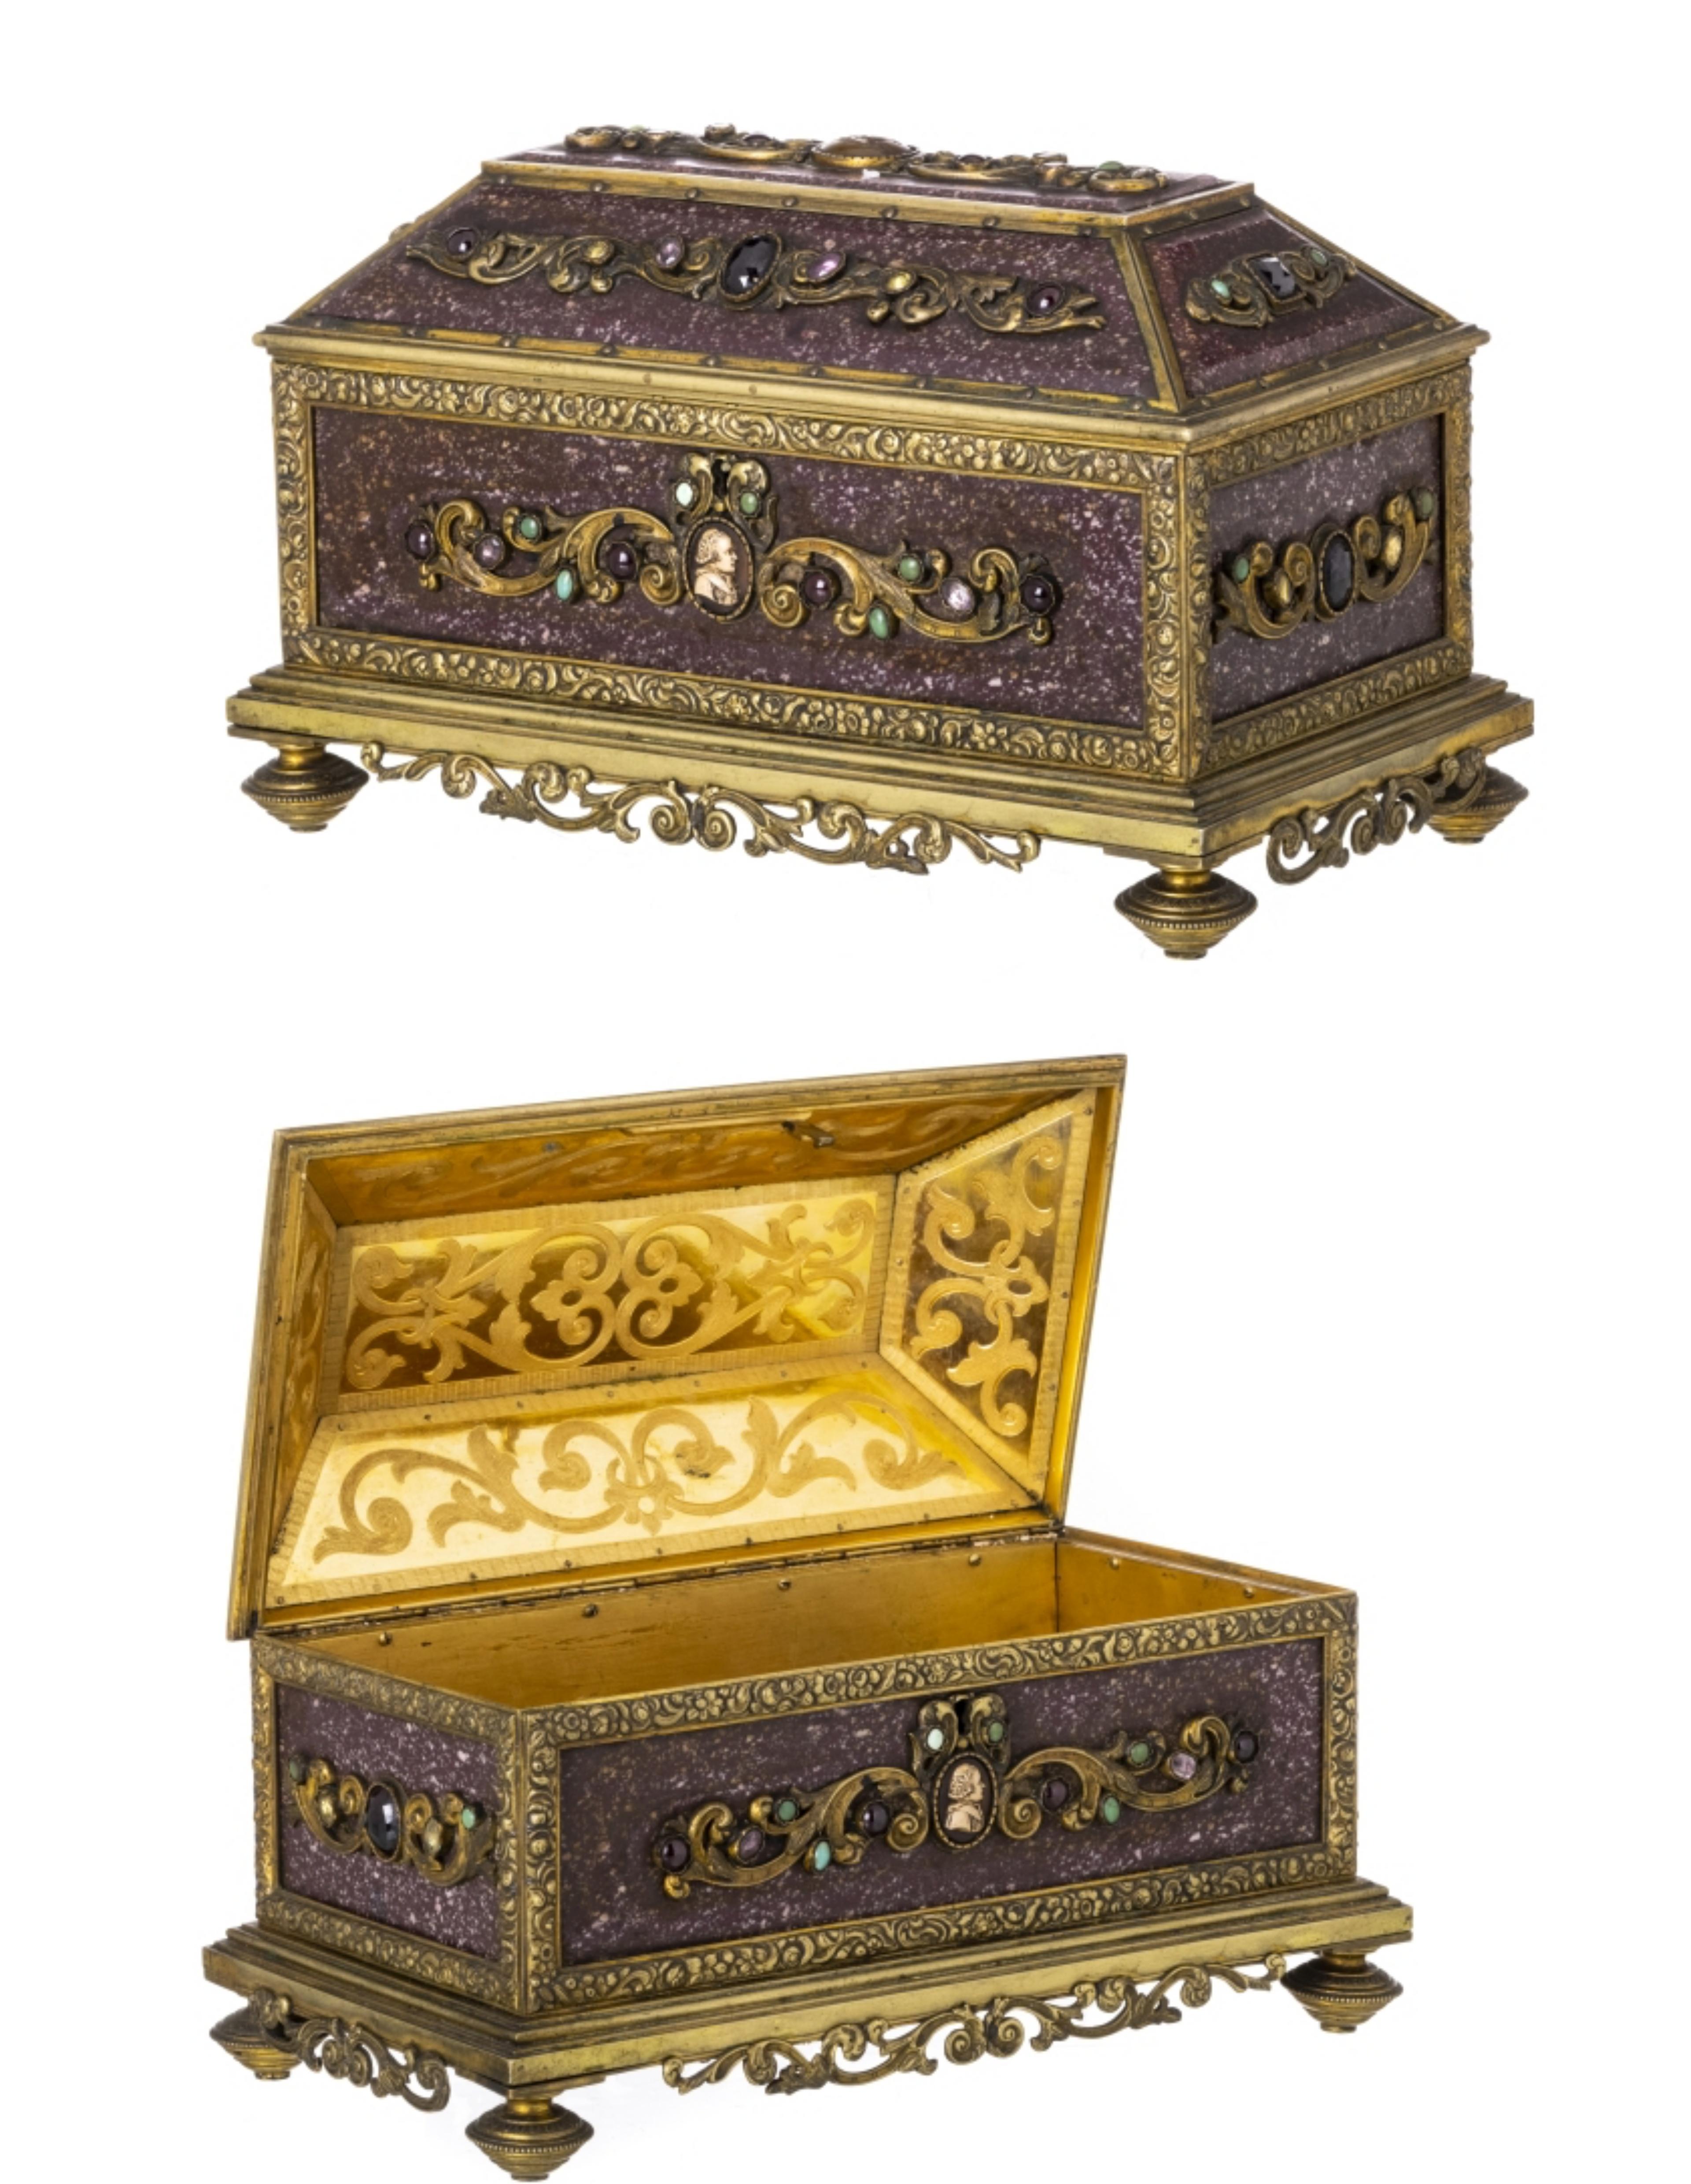 Hand-Crafted Important and Rare Italian Box Safe from the 17th Century '1647'